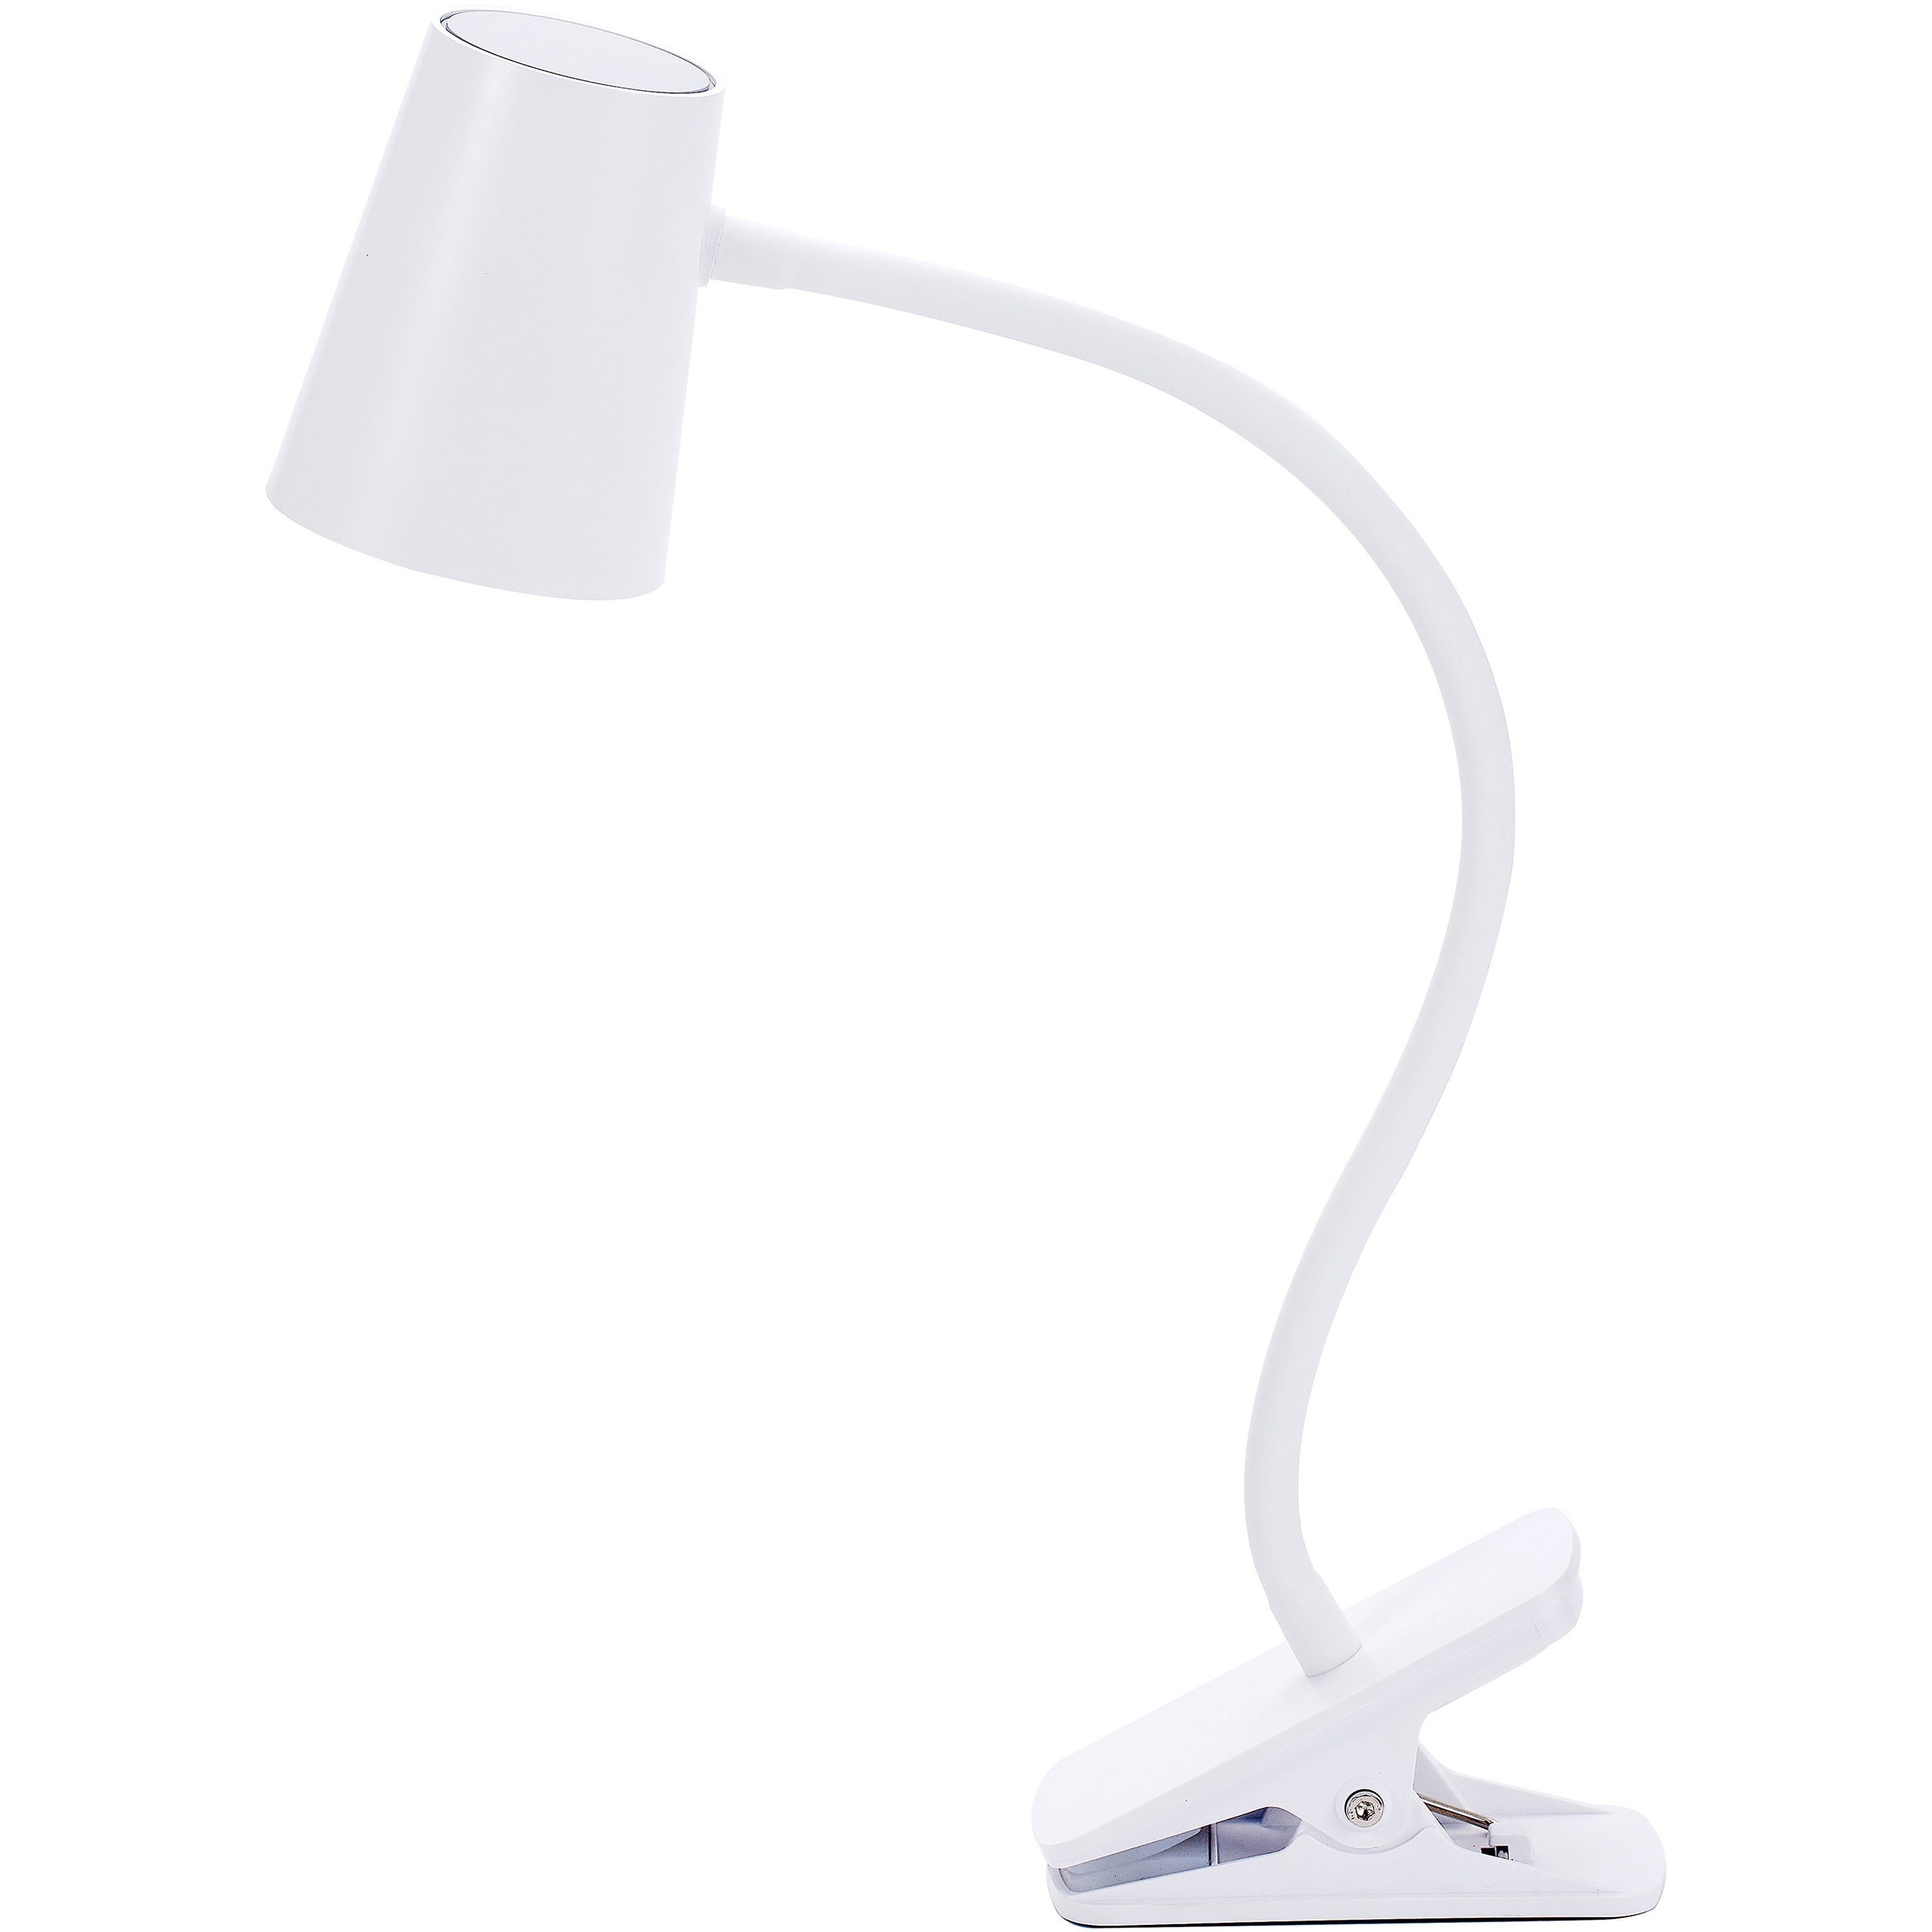 bostitch-adjustable-led-clamp-light-520-w-led-bulb-adjustable-flexible-neck-adjustable-head-silicone-desk-mountable-wall-mountable-white-for-desk-cubicle-home-office-classroom-communal-area_bosled2103 - 3